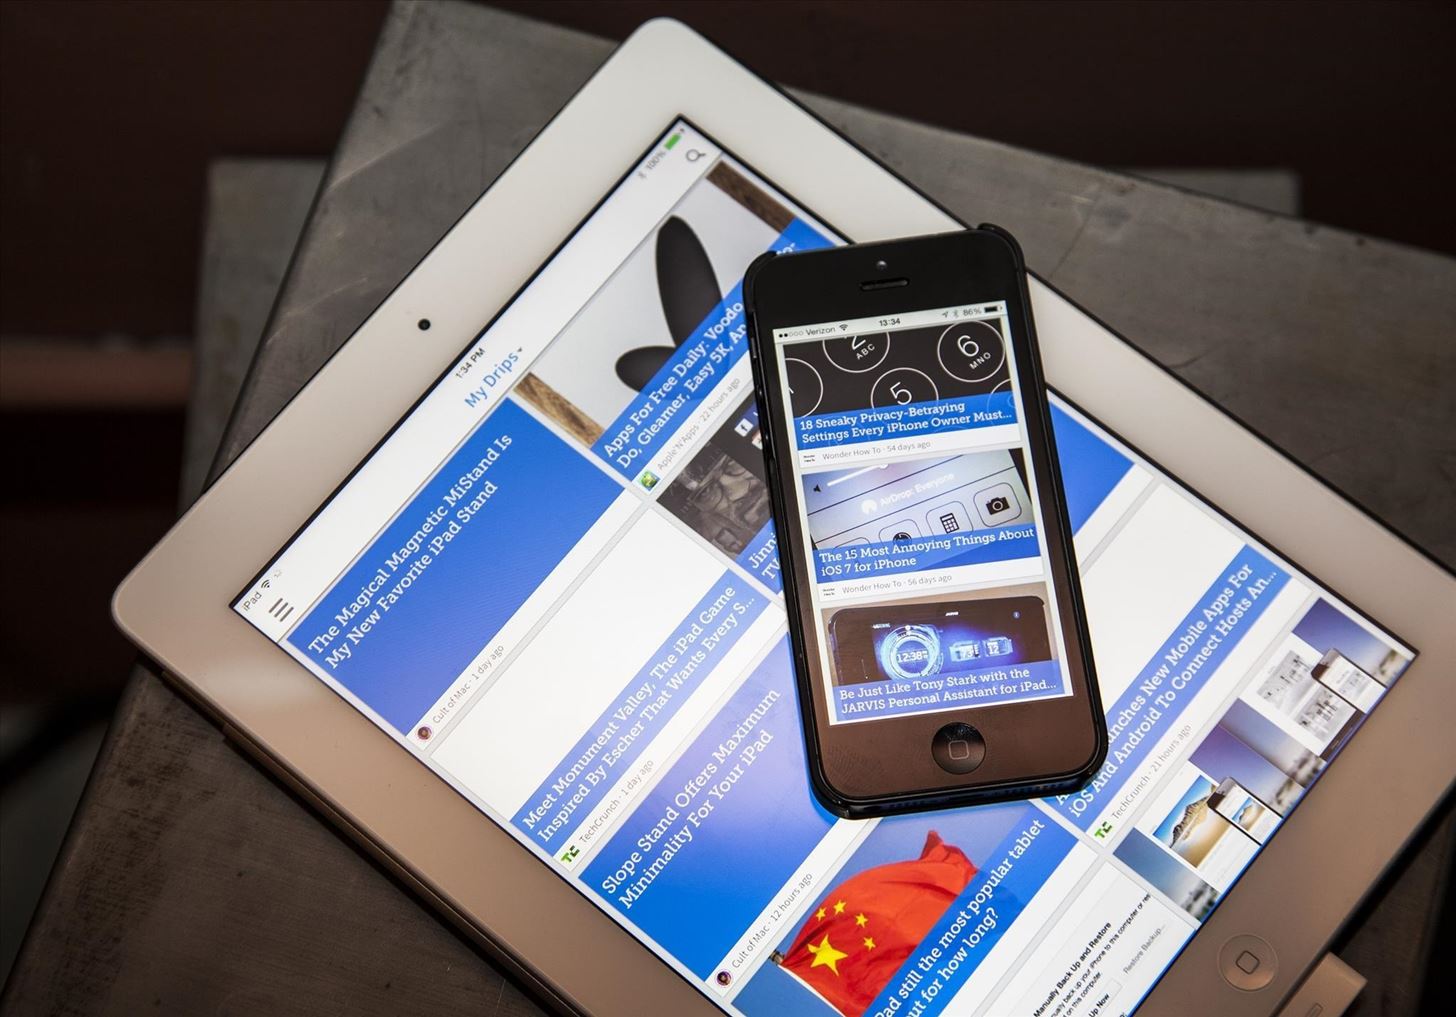 Drippler's New iOS App Tells You Everything You Need to Know About Your iPad or iPhone